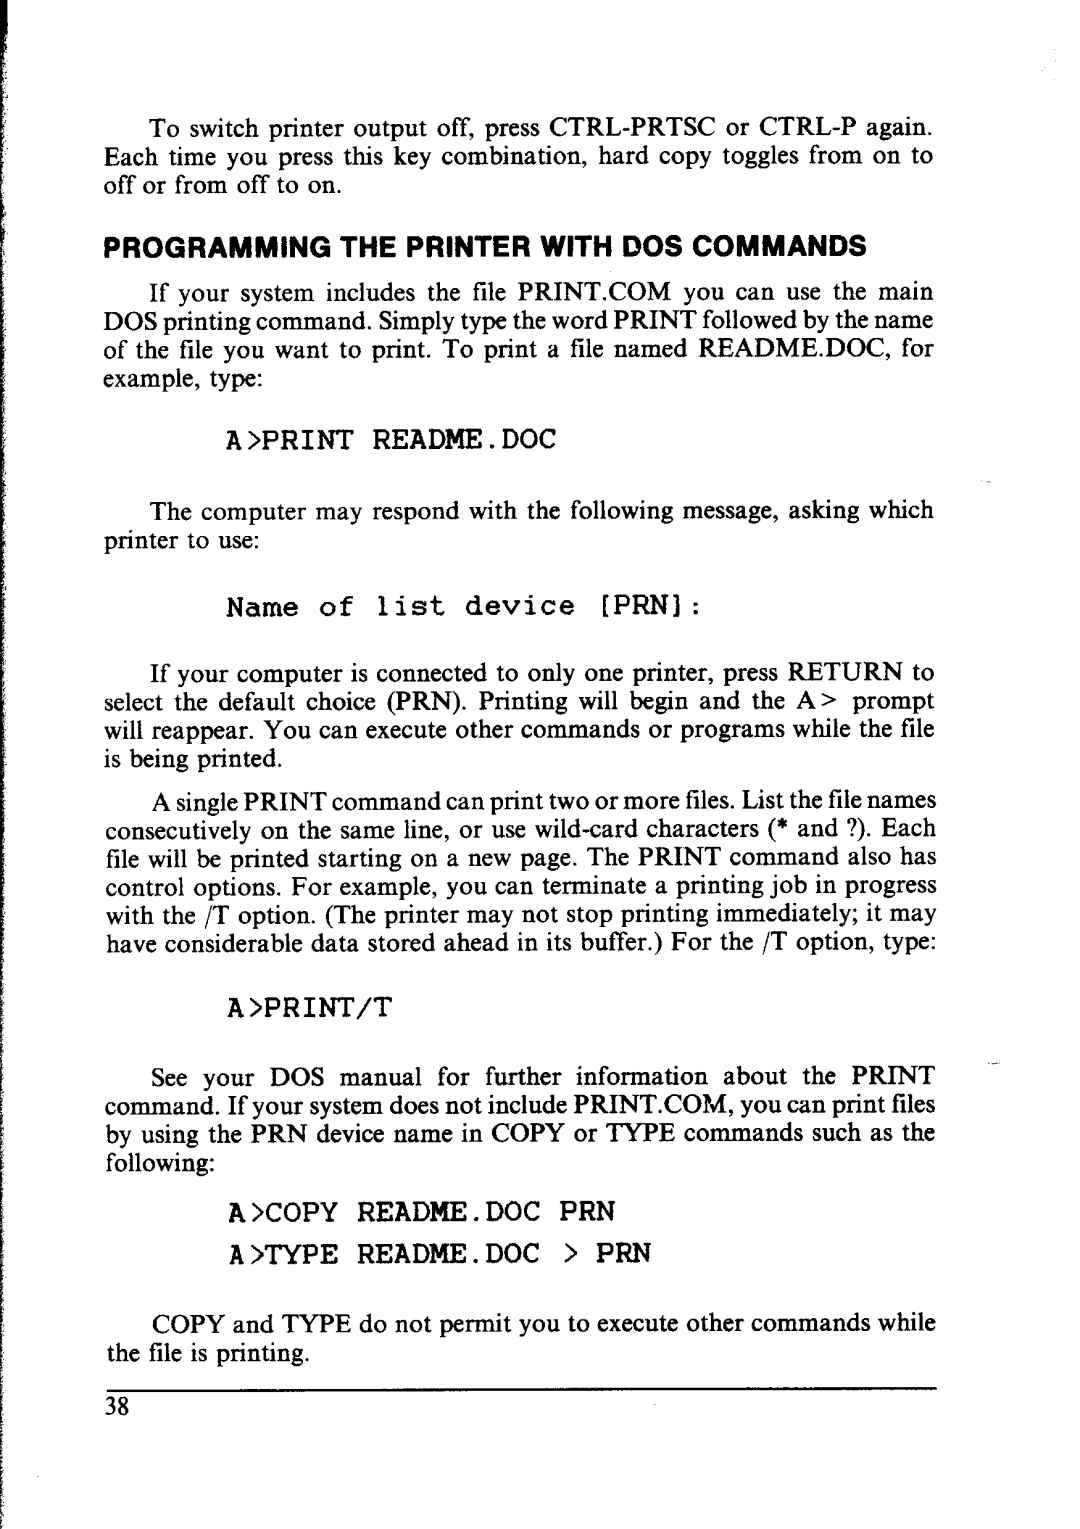 Star Micronics NX-1000 manual Programming The Printer With Dos Commands 